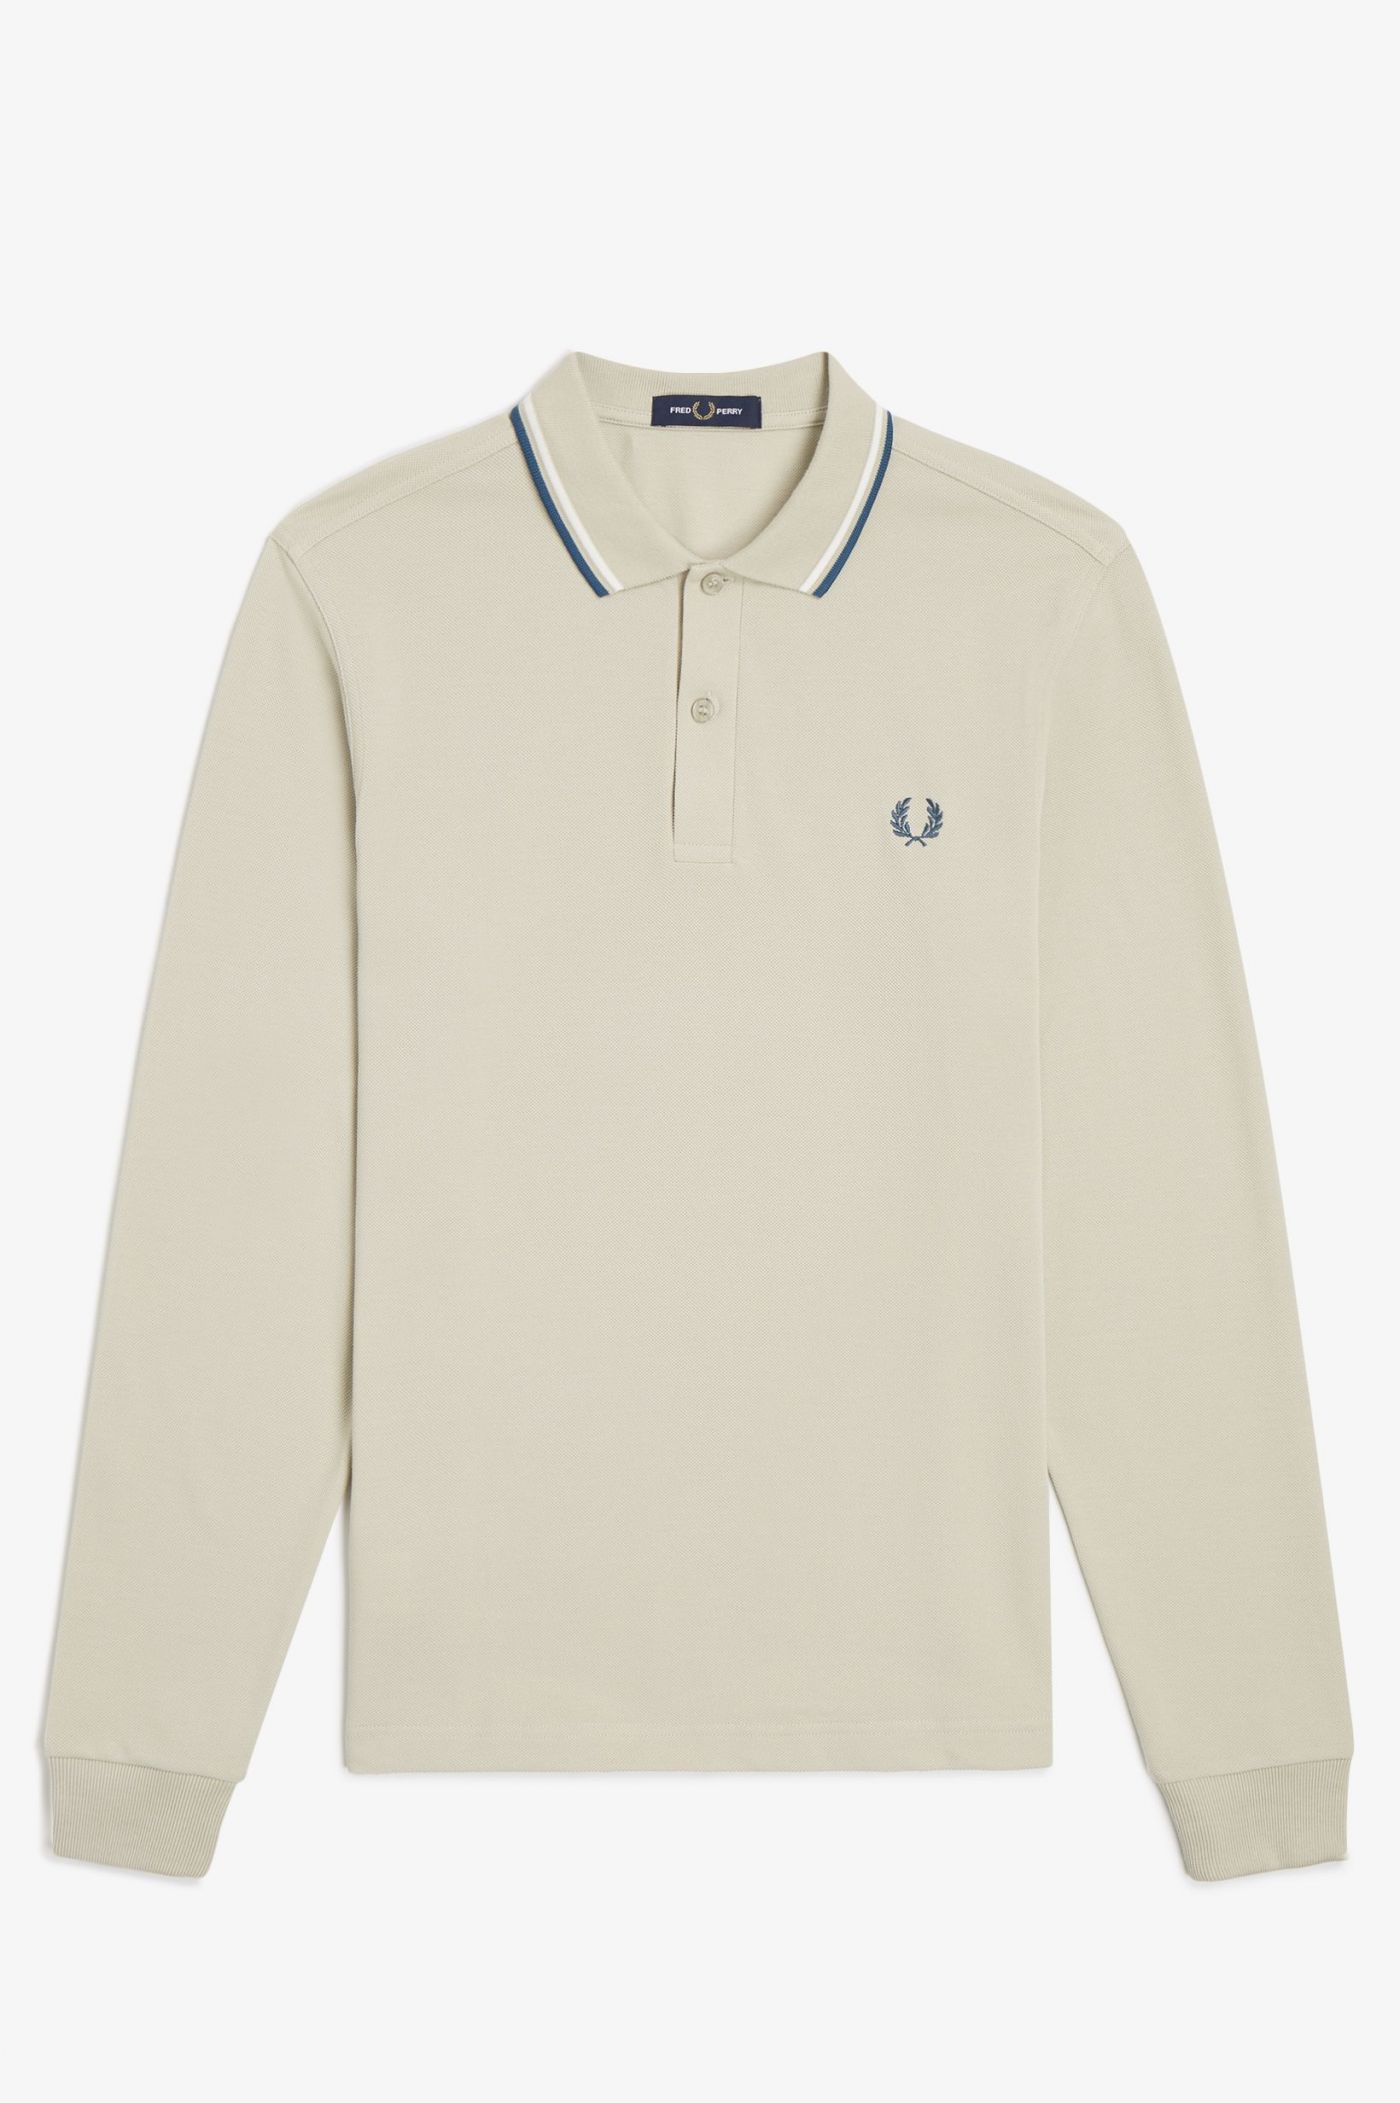 M3636 - Light Oyster / Snow White / Petrol Blue | The Fred Perry Shirt